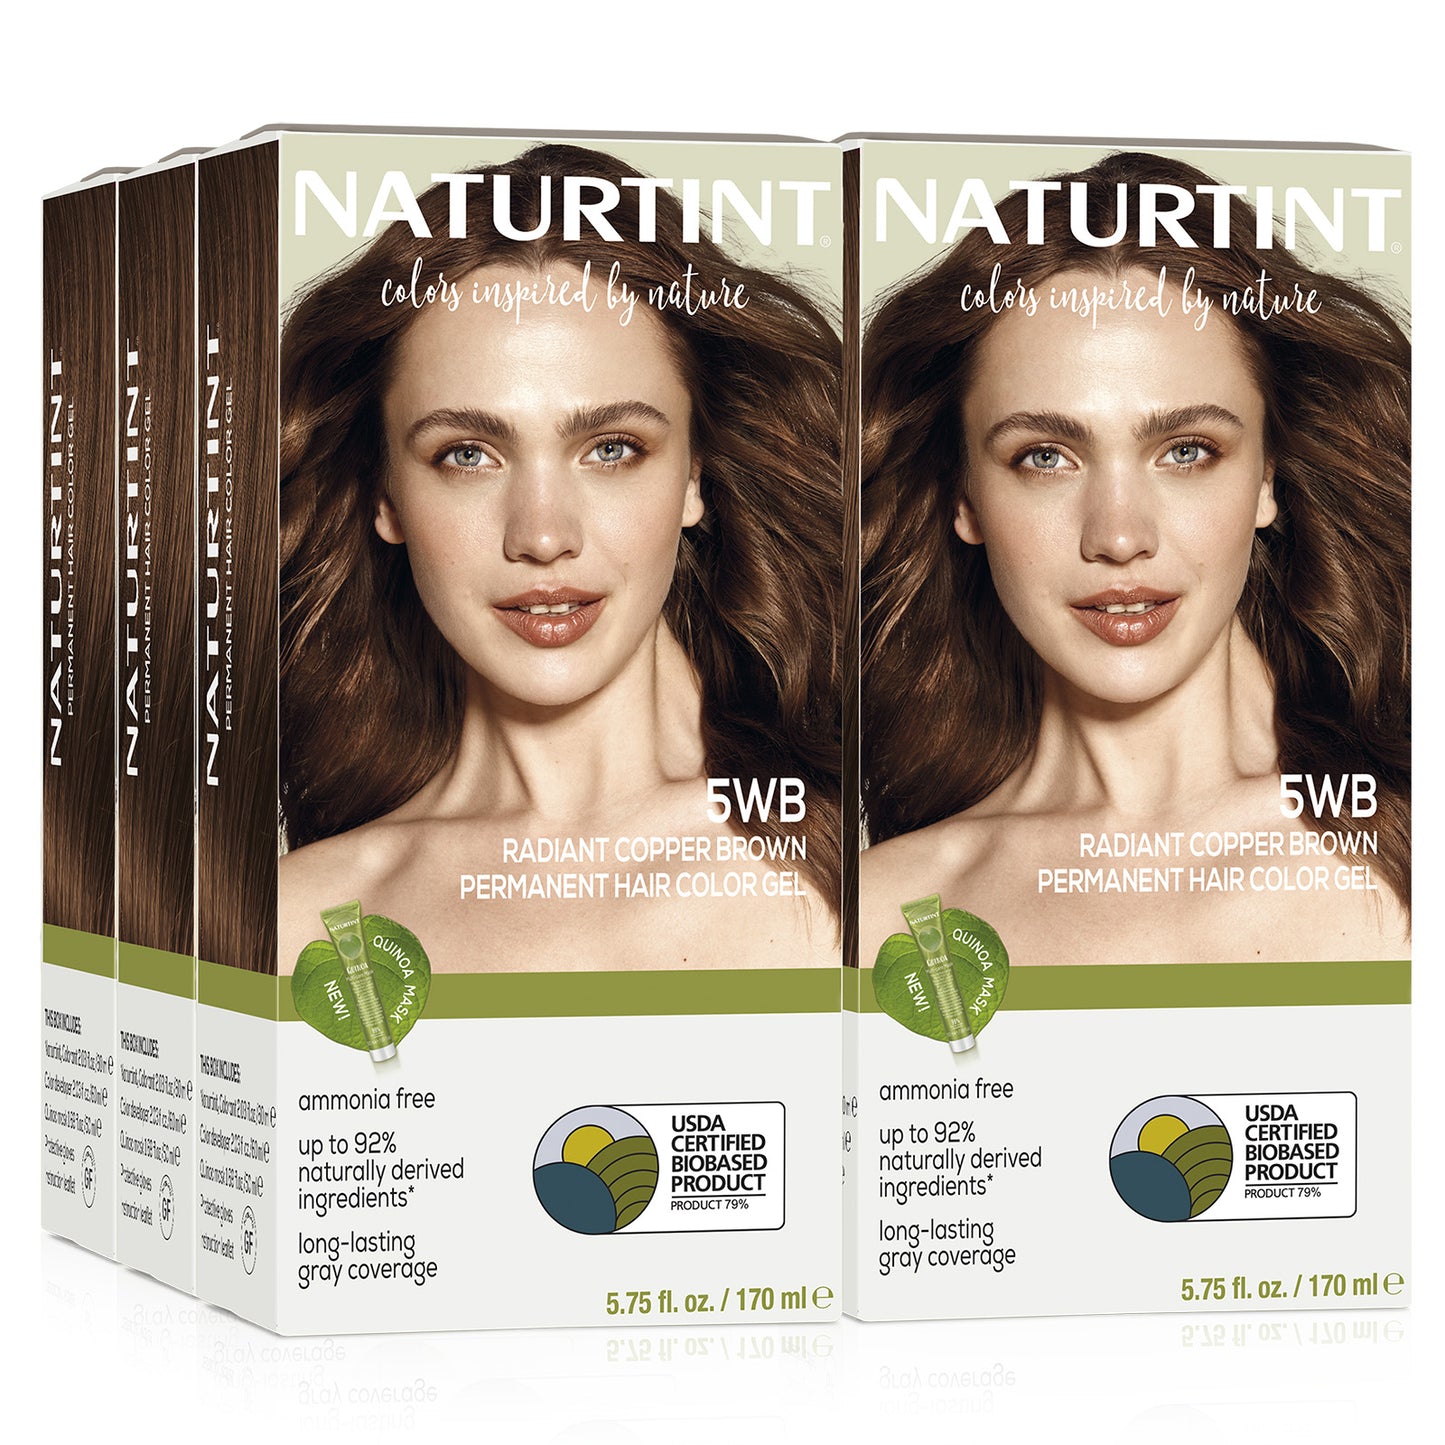 Naturtint Permanent Hair Color 5WB Radiant Copper Brown